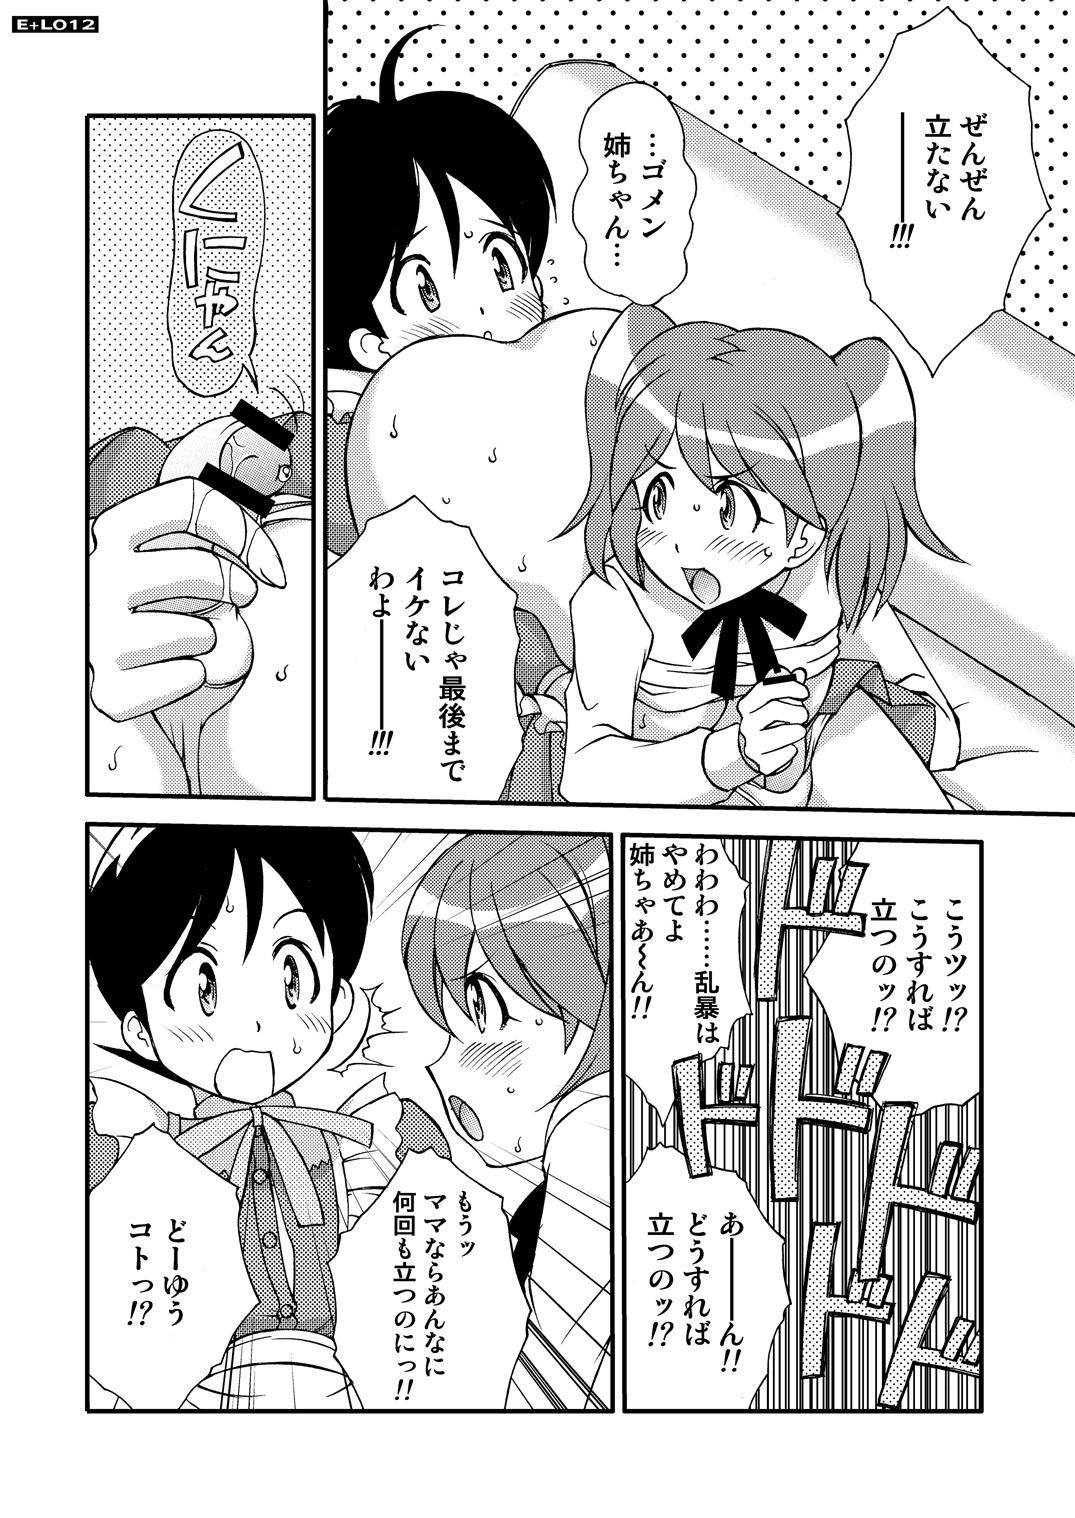 3some Energetic Love - Keroro gunsou Gay Trimmed - Page 11